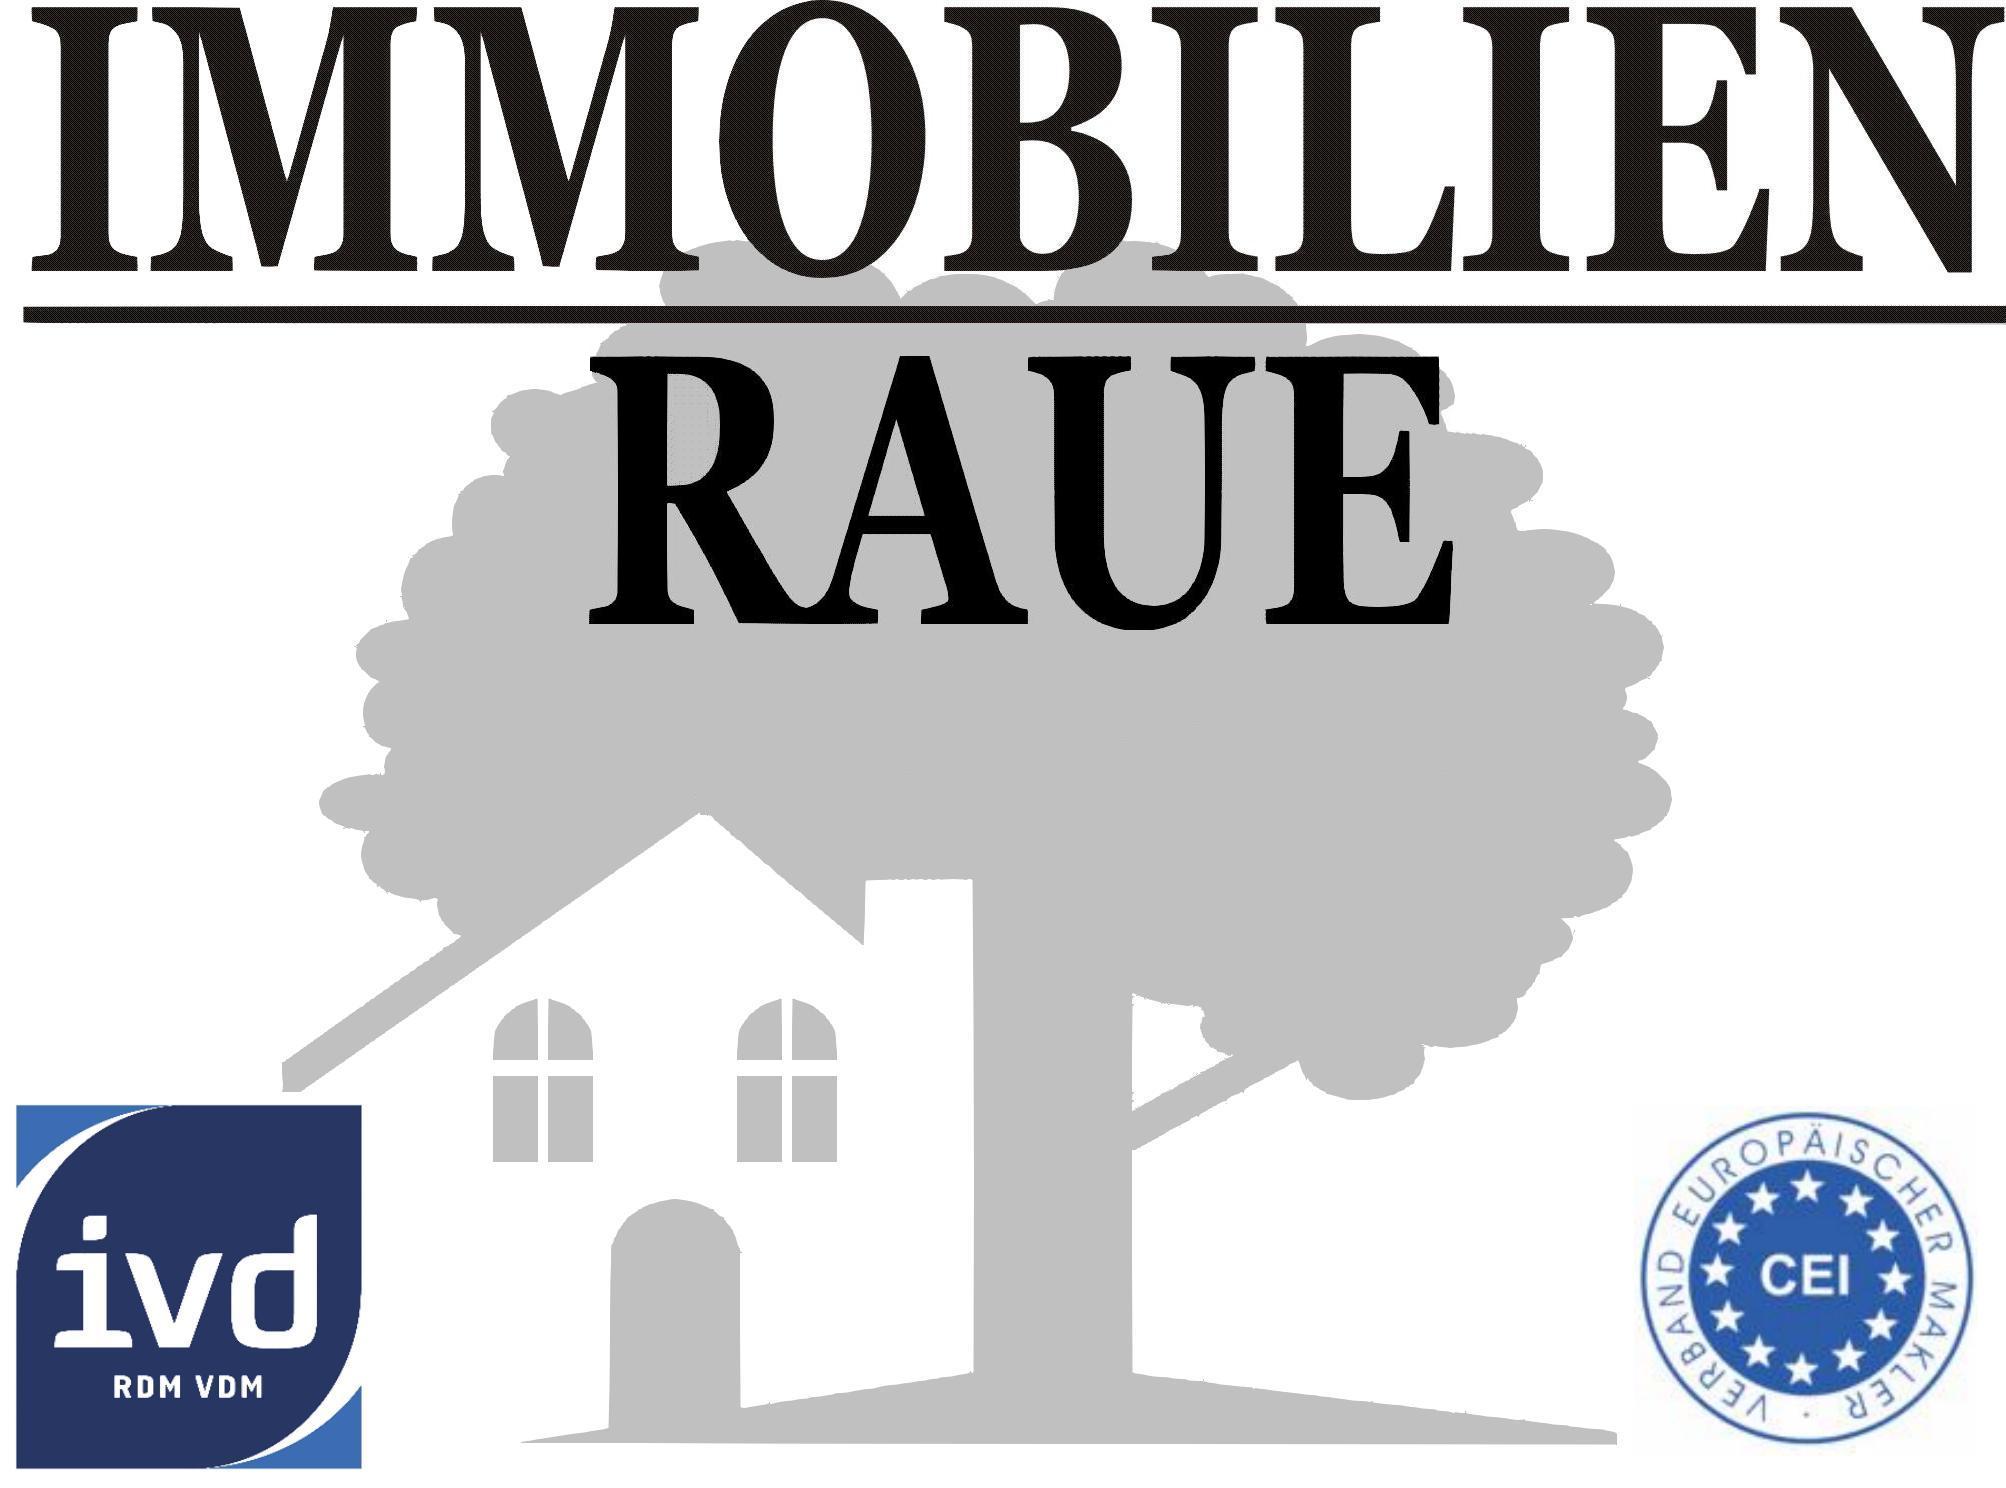 IMMOBILIEN RAUE (Ehrenmitglied im IVD)